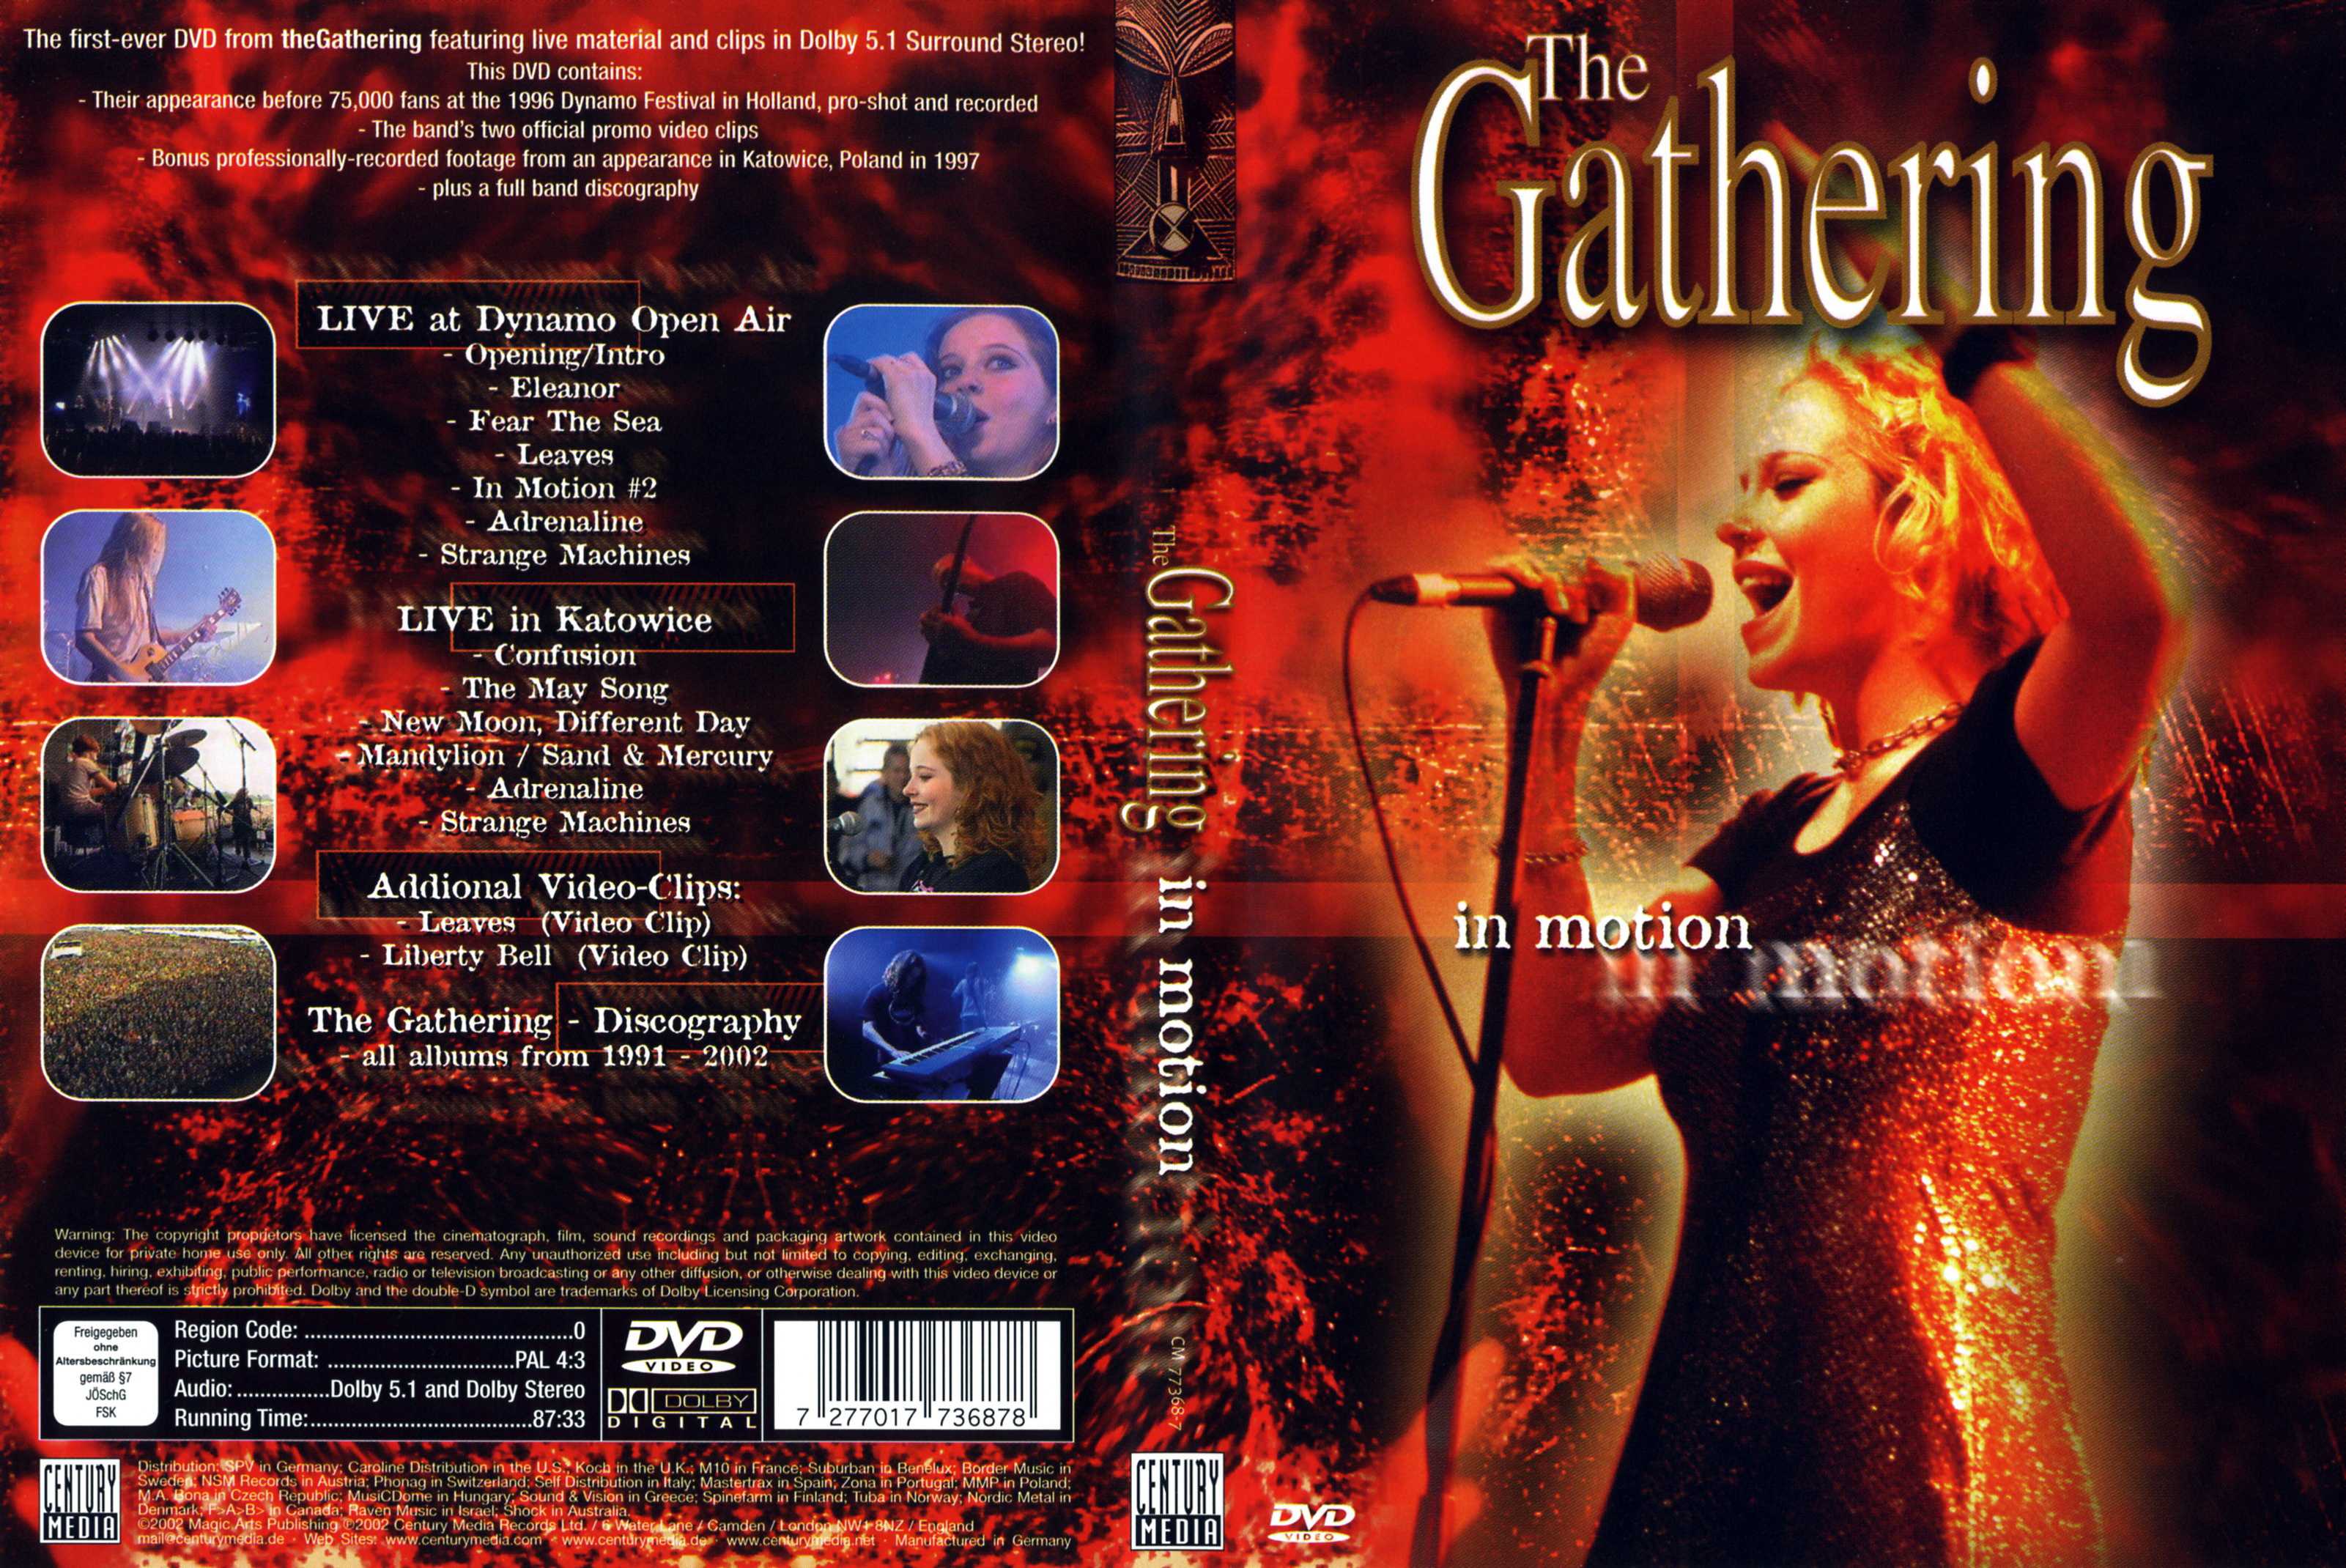 Jaquette DVD The gatering in motion